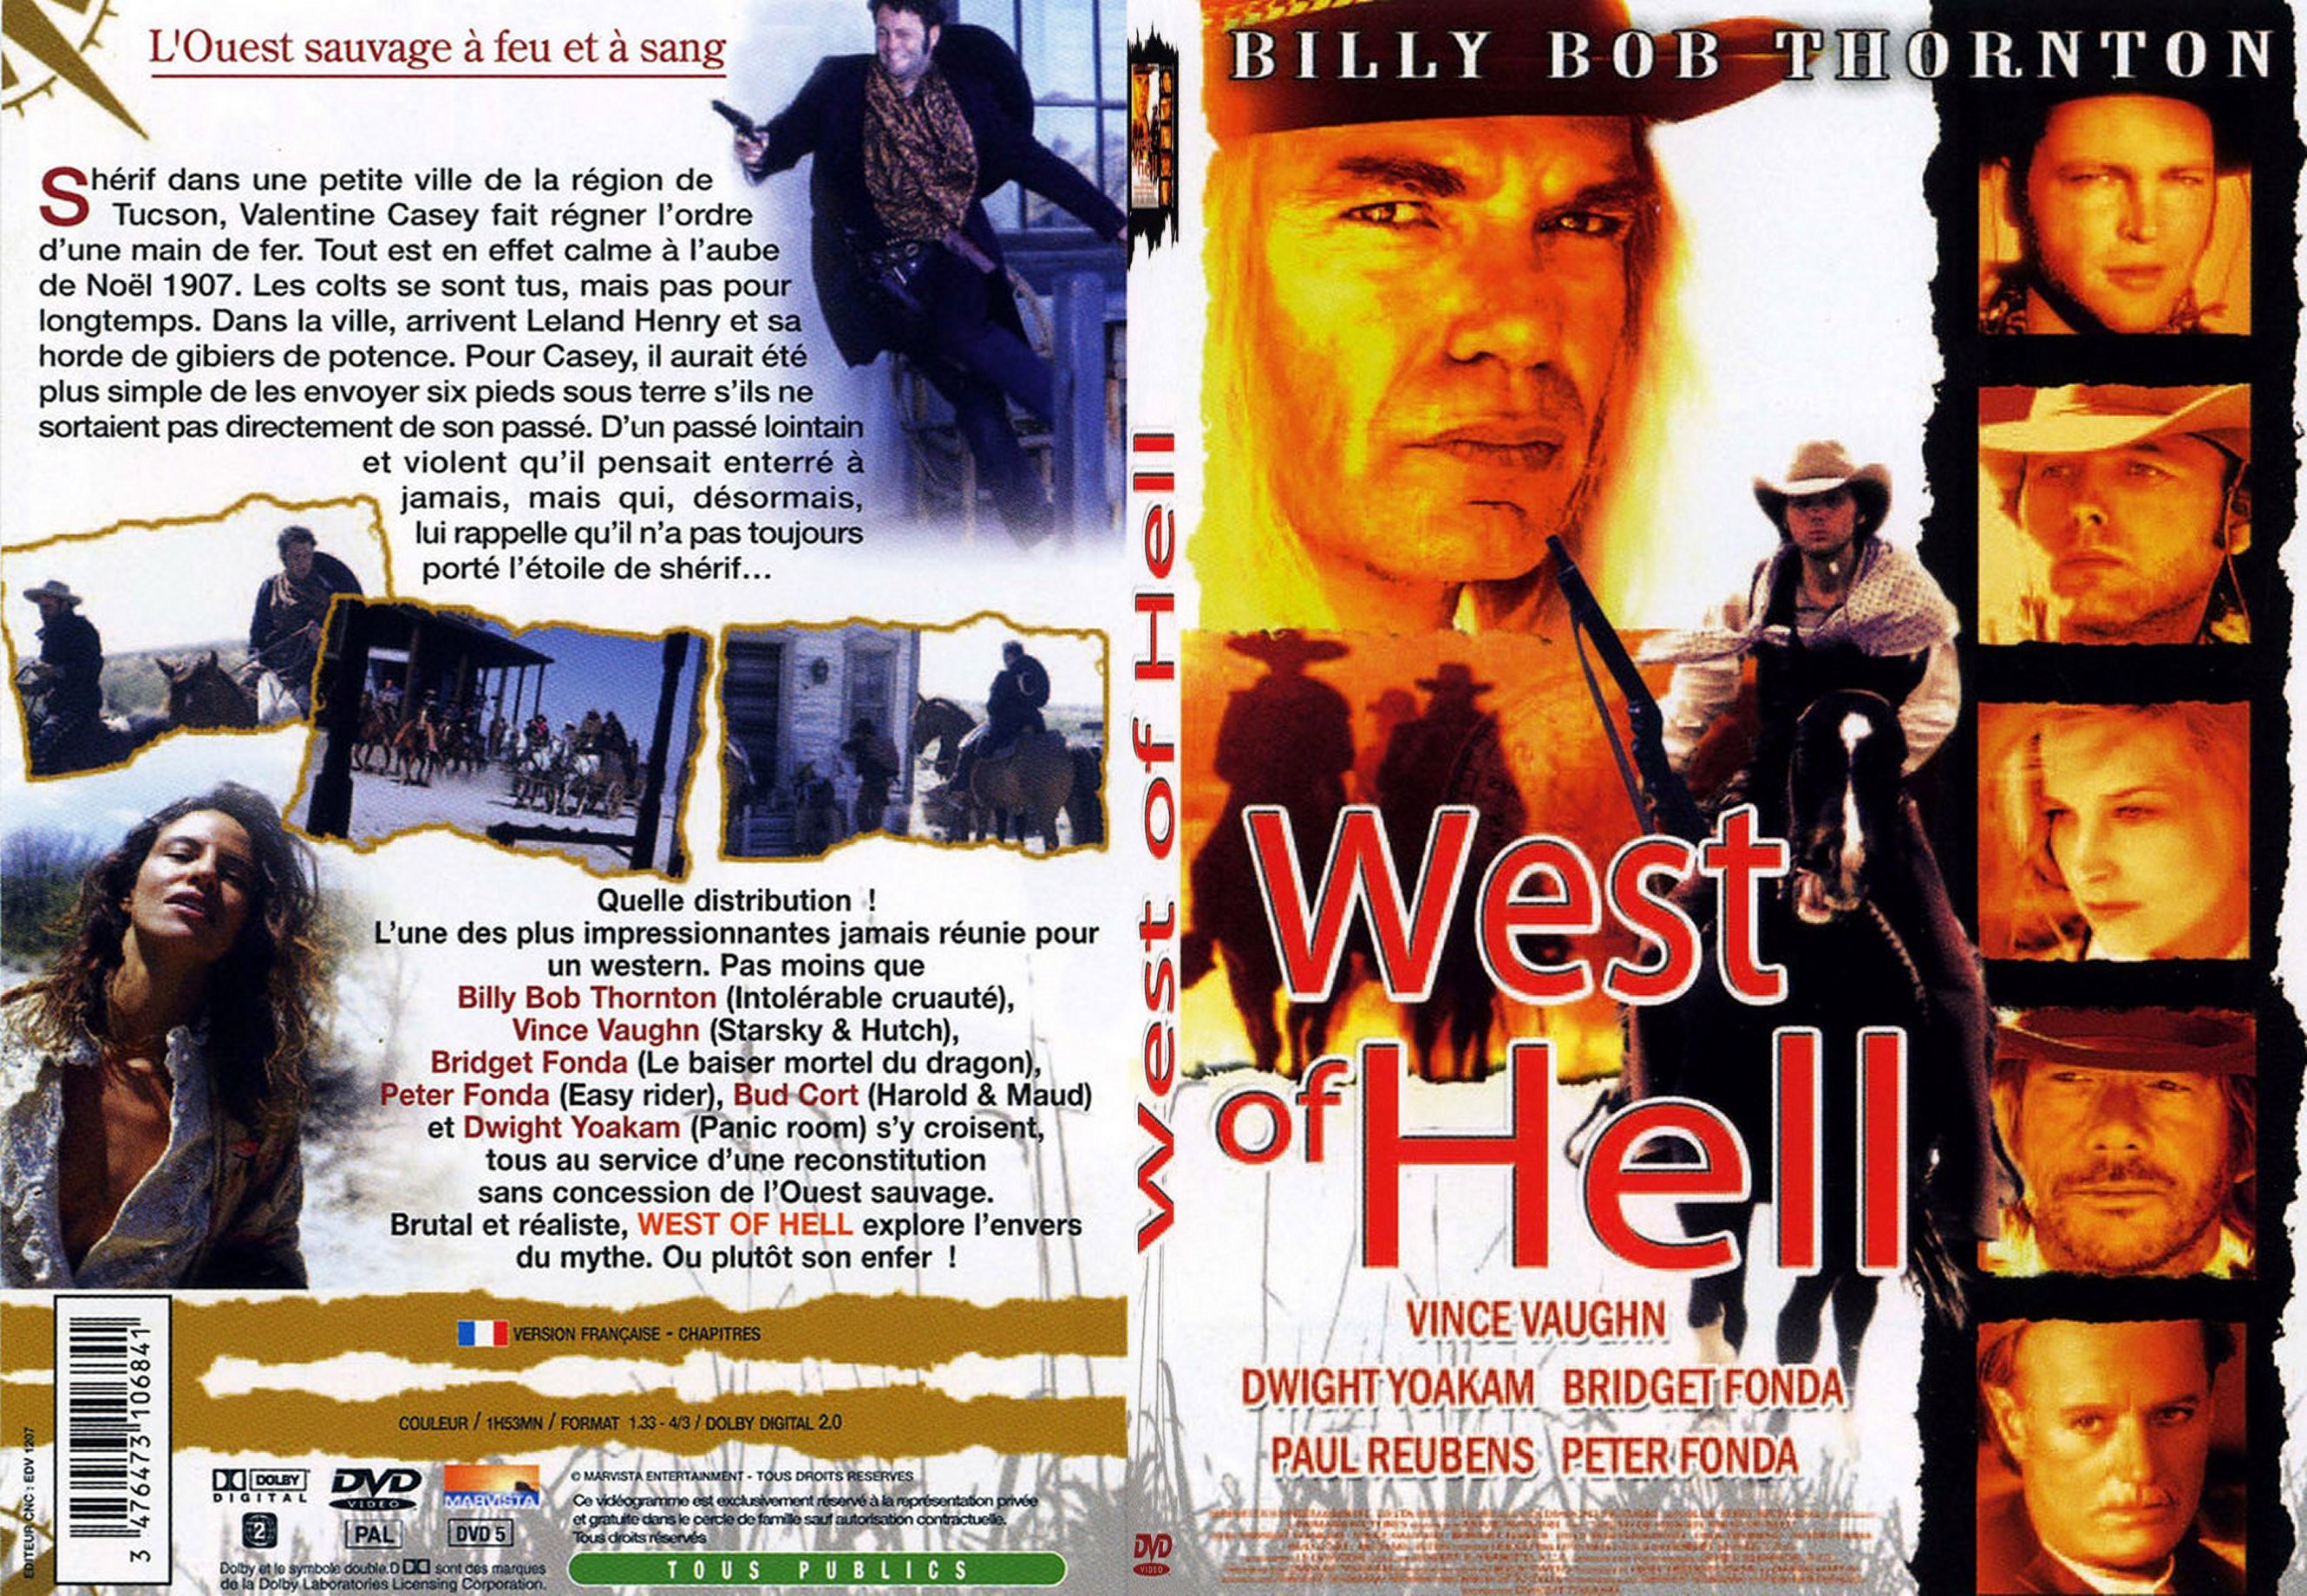 Jaquette DVD West of Hell - SLIM